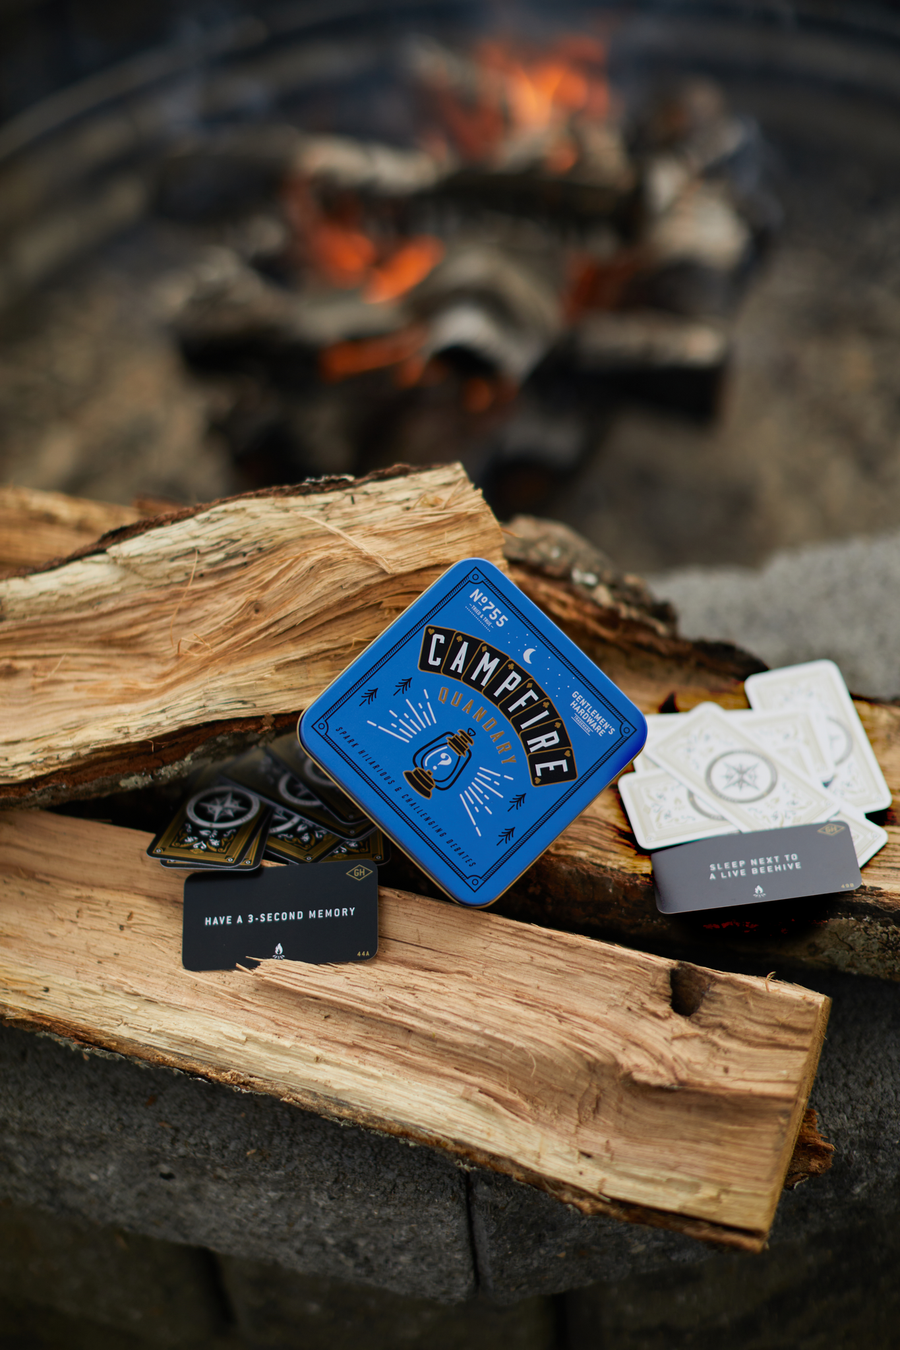 Campfire quandary cards on firewood. 